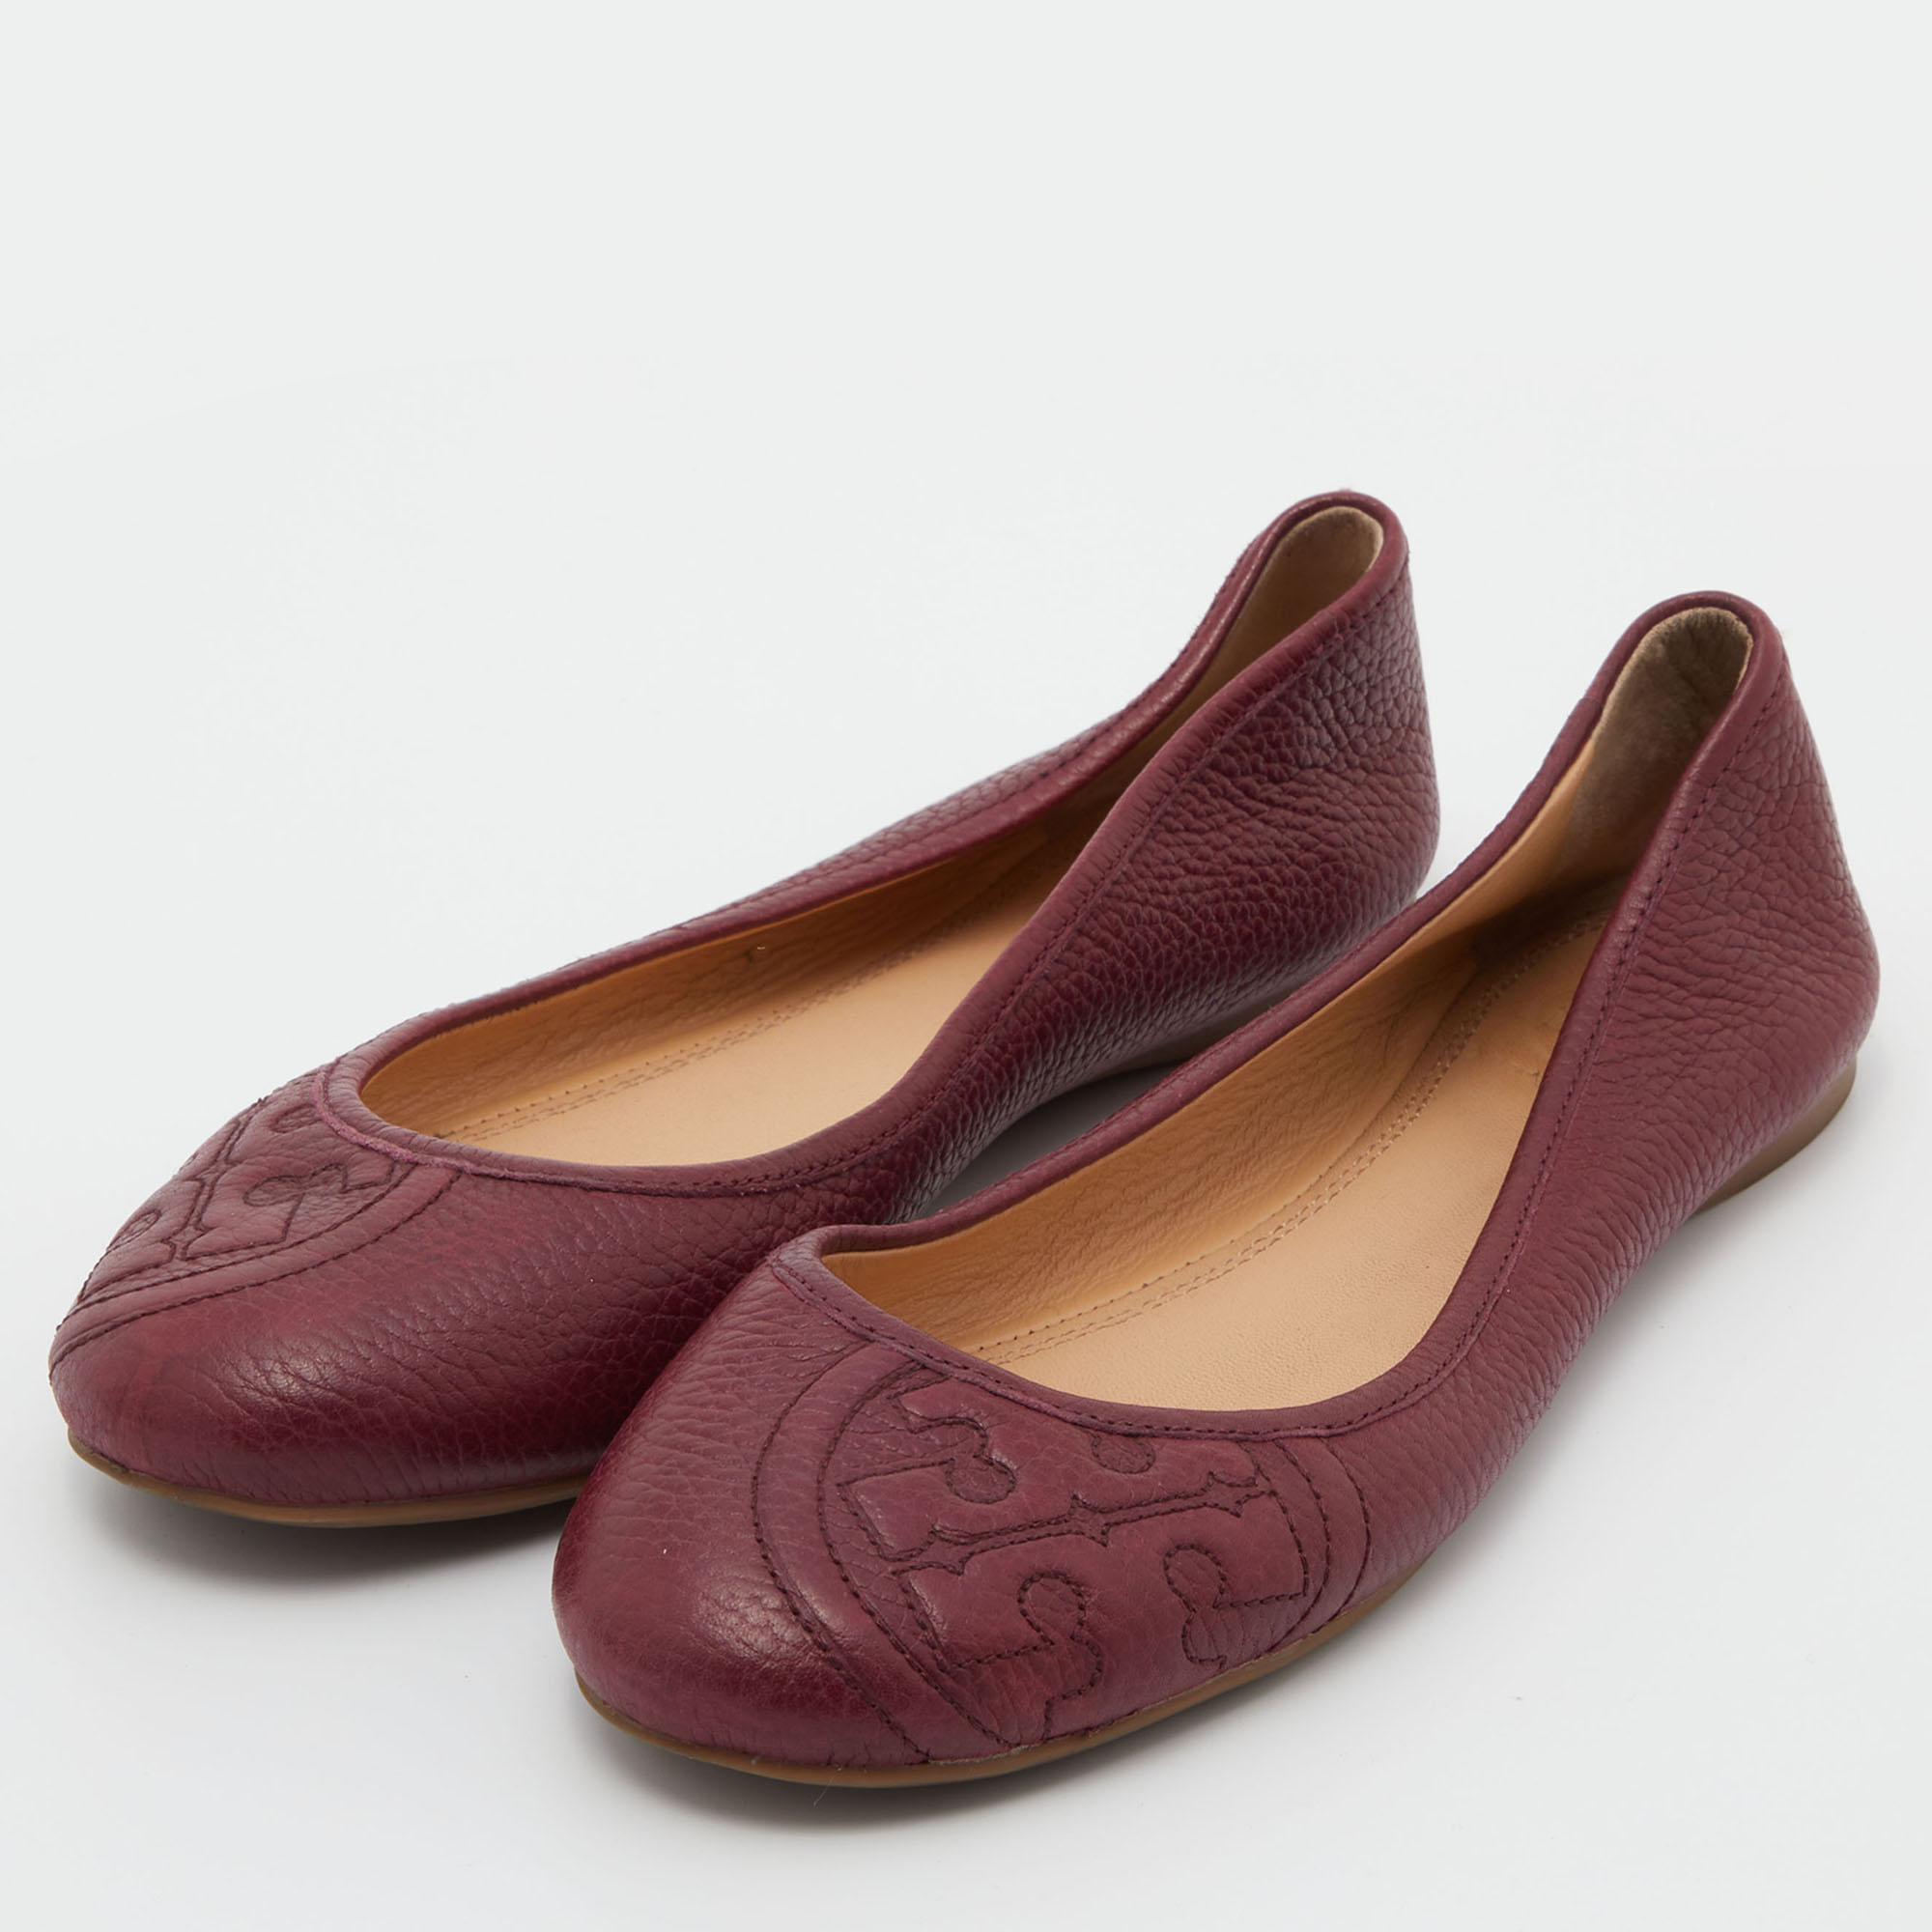 

Tory Burch Burgundy Leather Ballet Flats Size